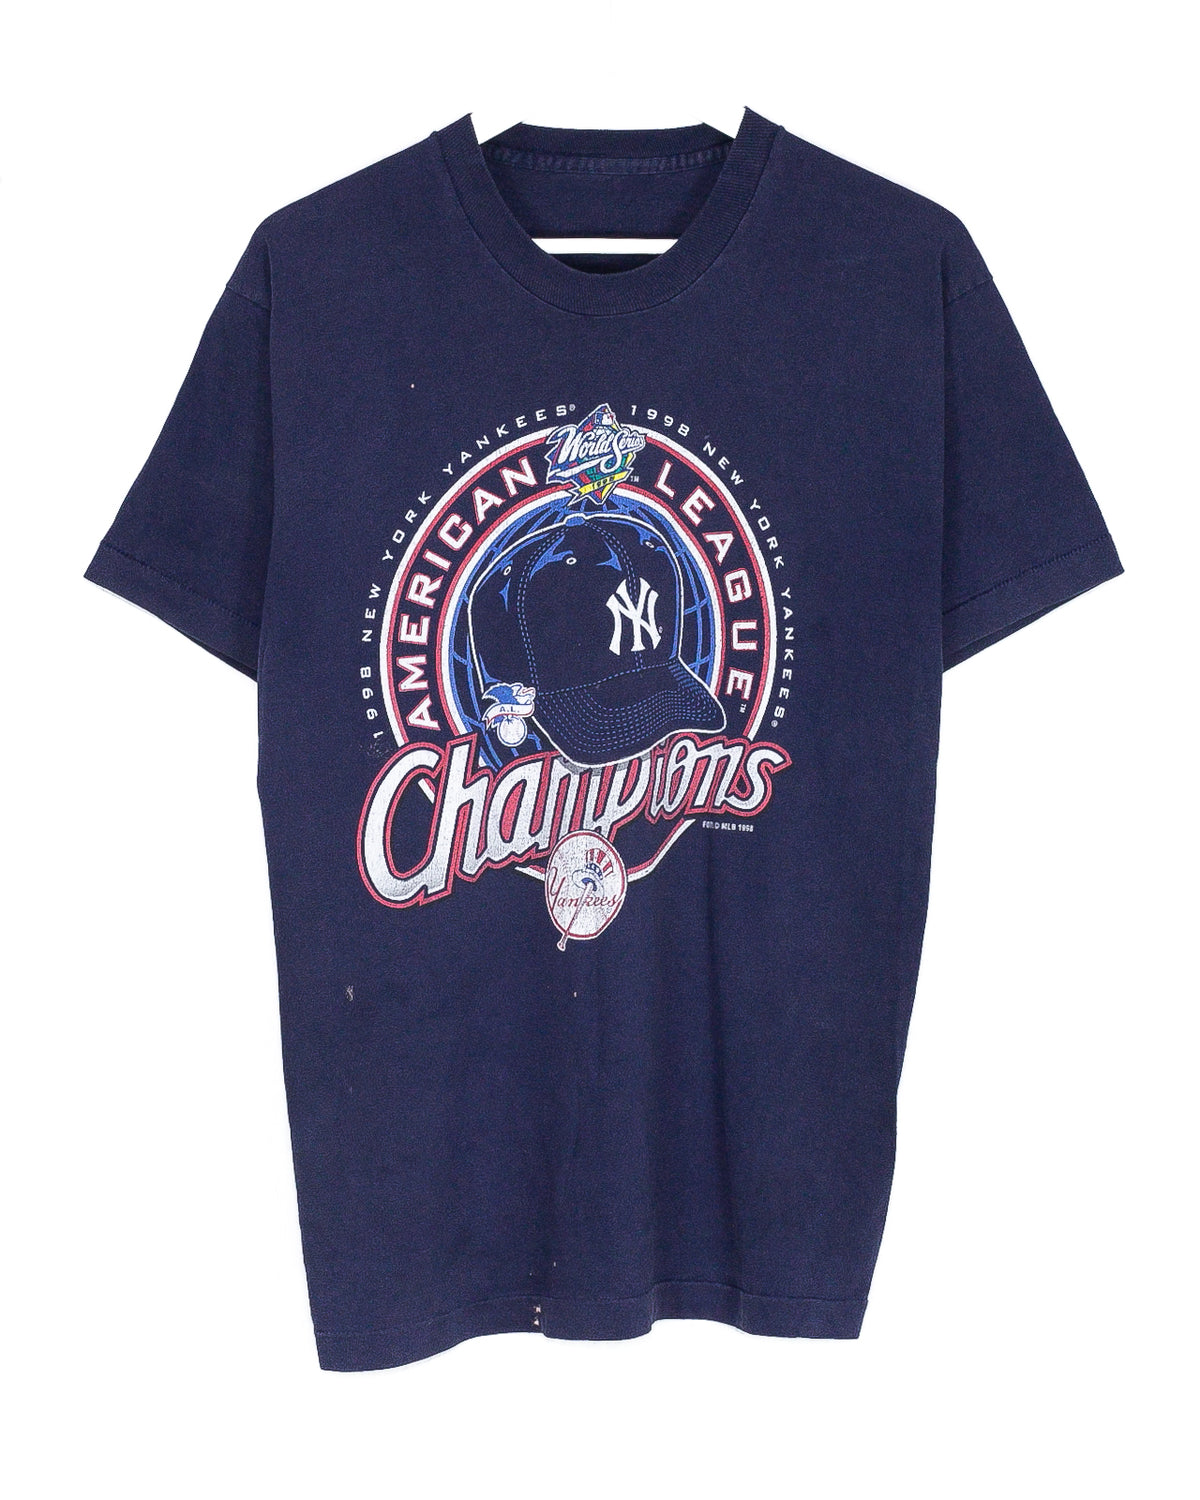 Take a look at the best Vintage '98 Yankees T-shirt L/XL Storeroom Vintage  T-Shirt available at unbeatable Prices